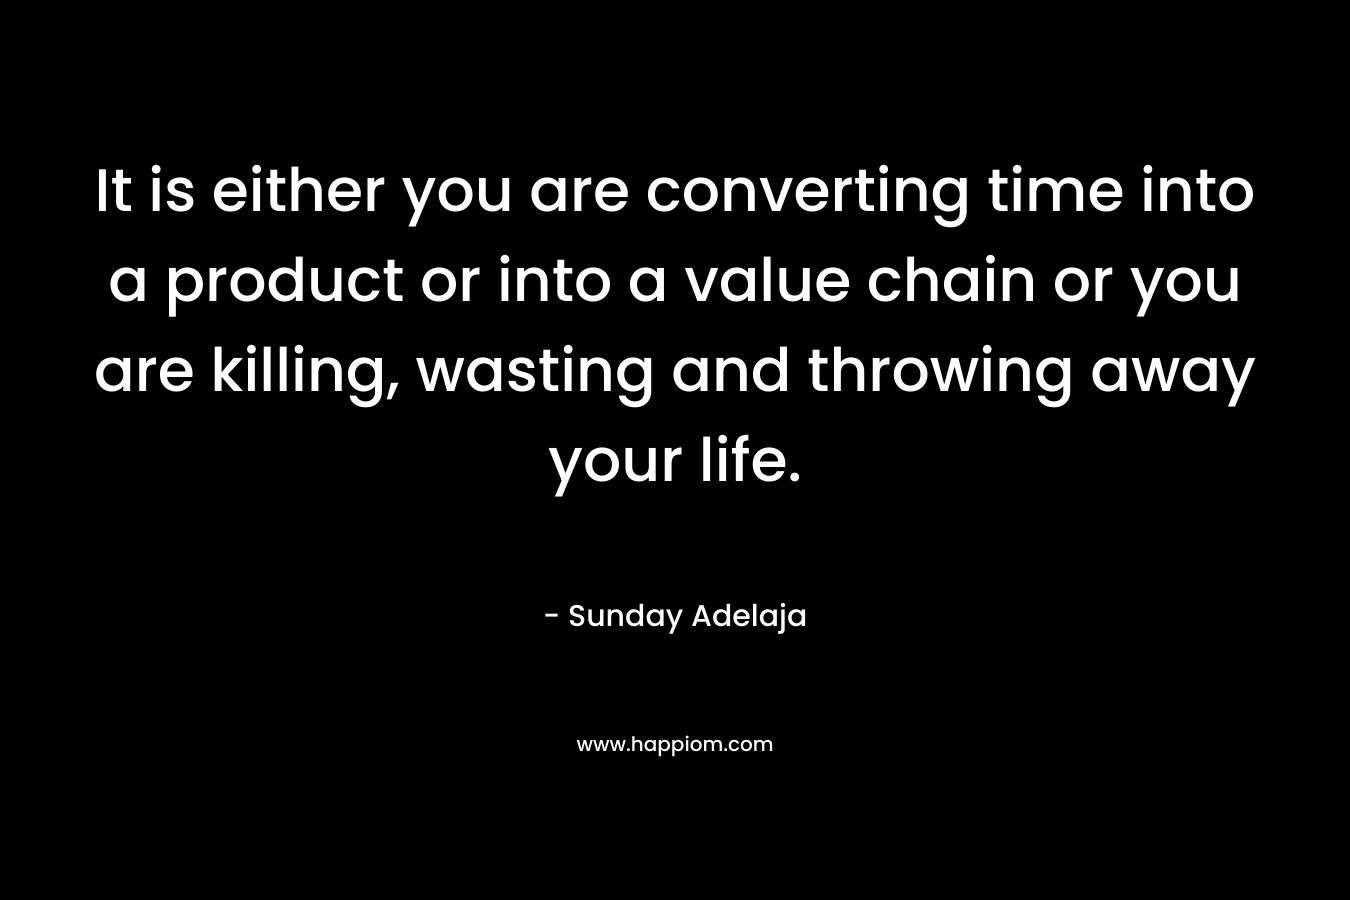 It is either you are converting time into a product or into a value chain or you are killing, wasting and throwing away your life. – Sunday Adelaja